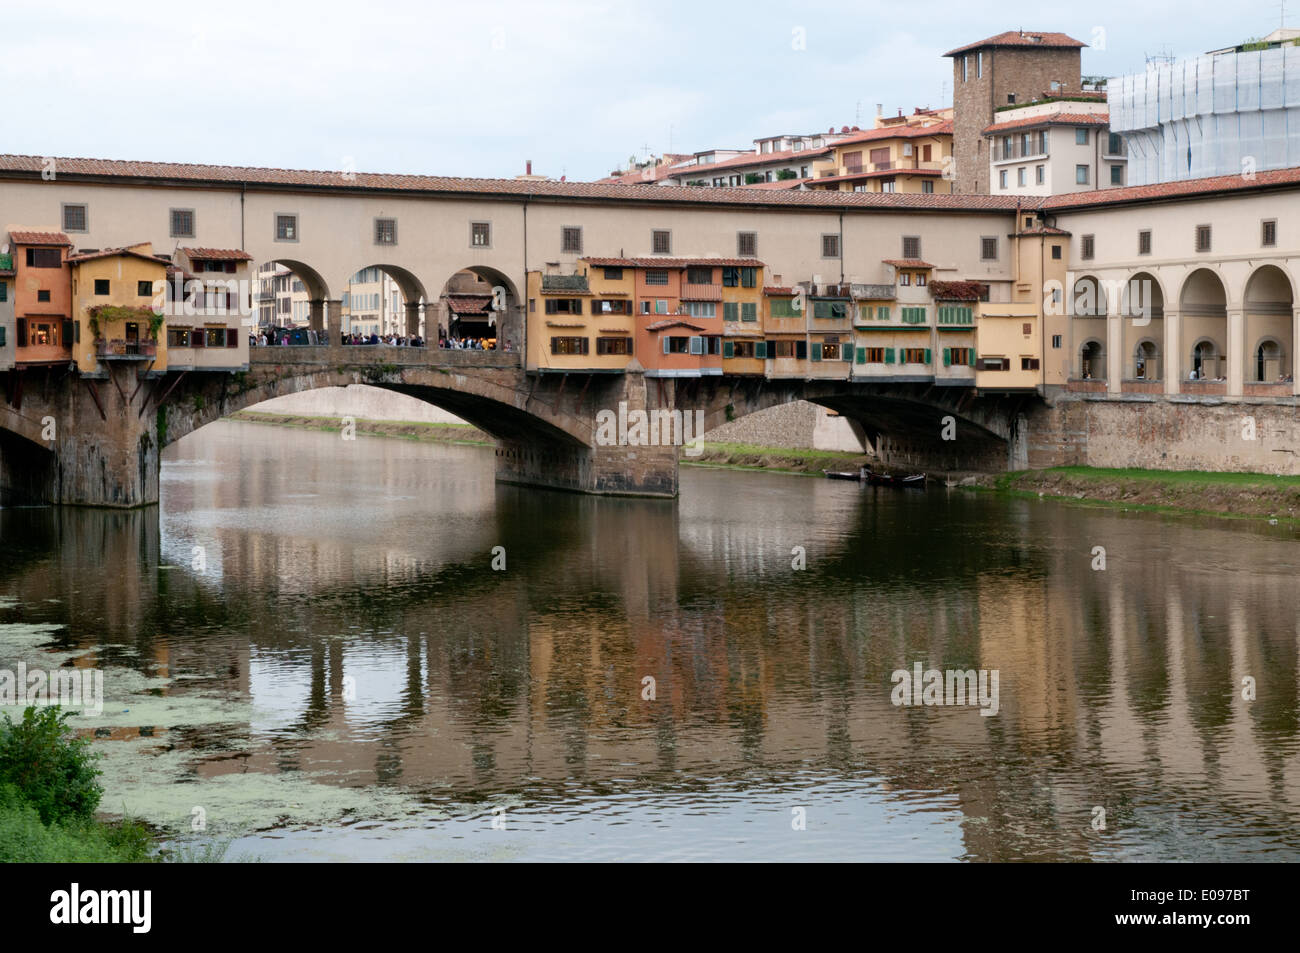 East side of the Ponte Vecchio over the River Arno Florence Italy Stock Photo